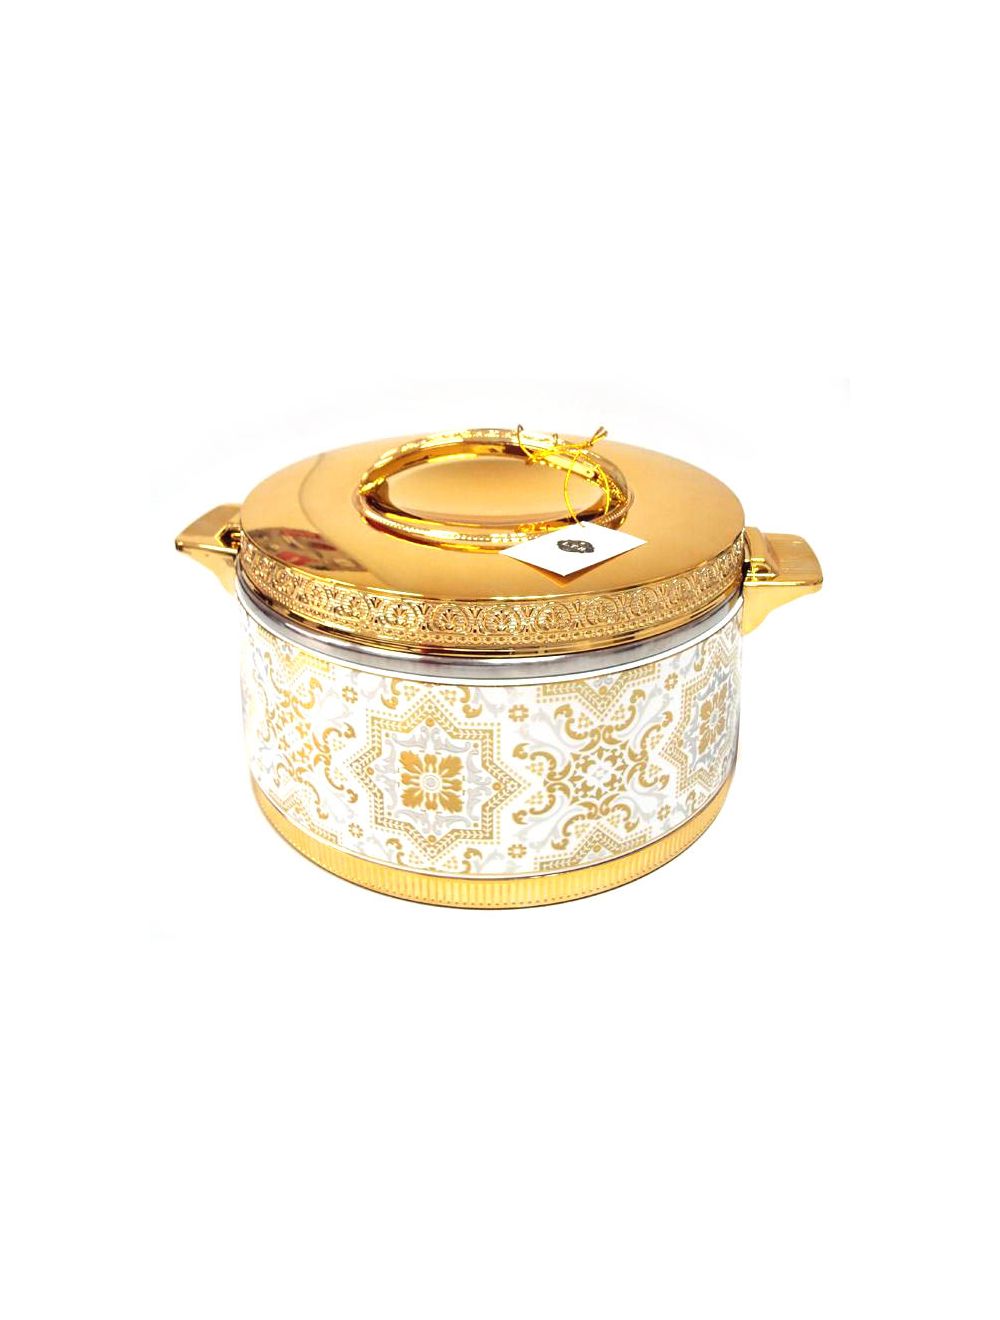 Hotpot Metal Gold and Silver Design 5.5L